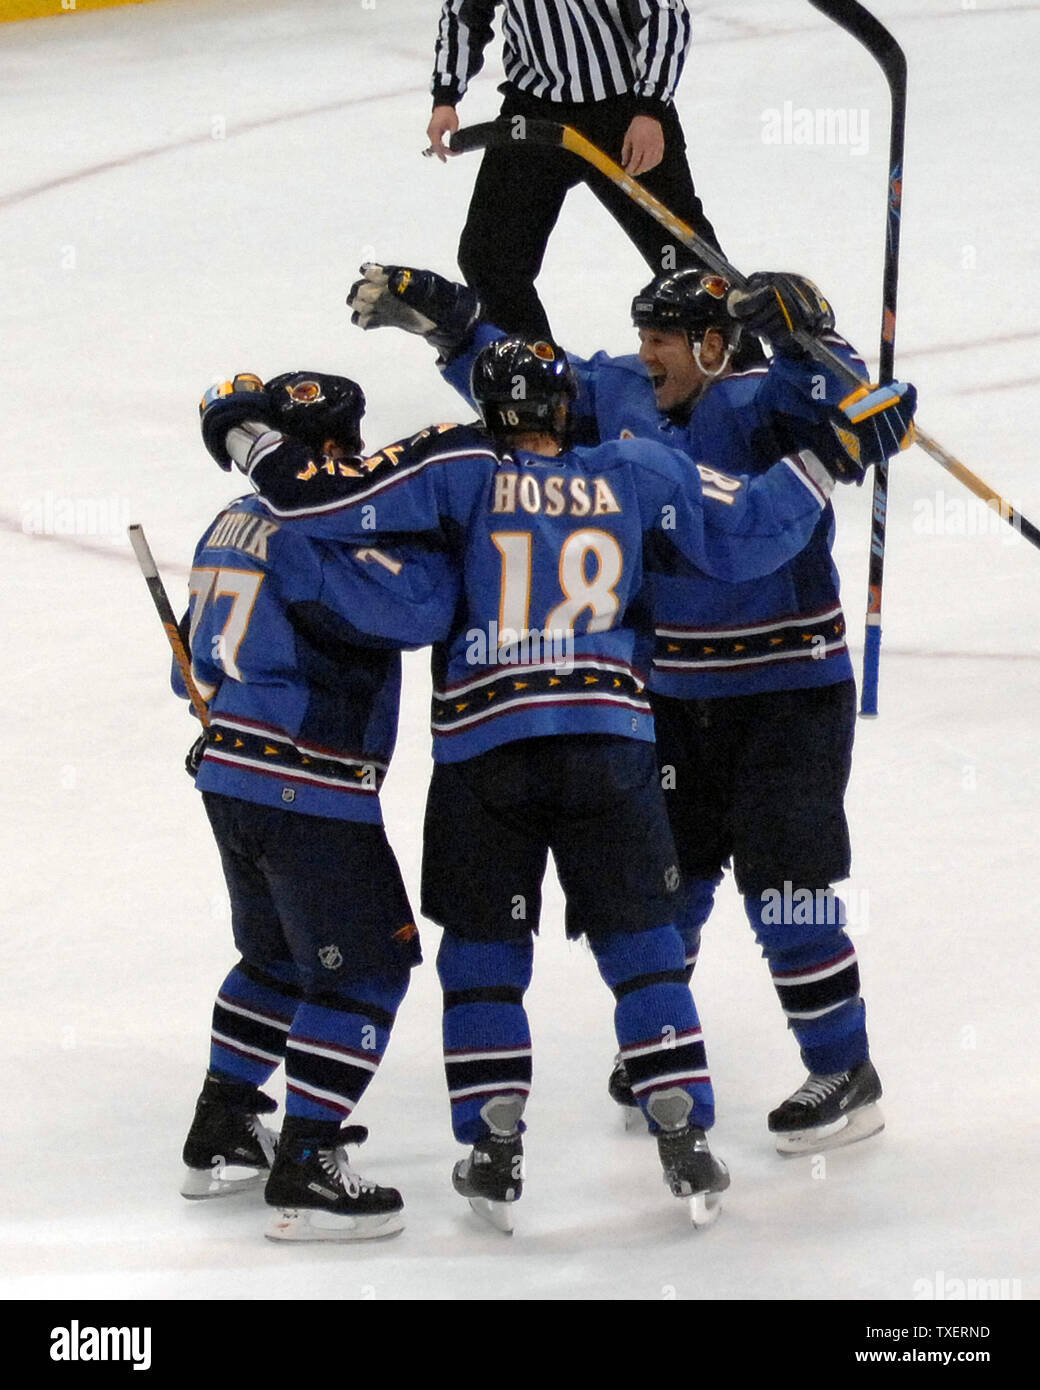 Atlanta Thrashers Alexei Zhitnik (left) of Ukraine is mobbed by teammates Marian Hossa (18) of Slovakia and Keith Tkachuk after he hit the game-winning goal in overtime to defeat the New York Rangers at Philips Arena in Atlanta, March 16, 2007. (UPI Photo/John Dickerson) Stock Photo